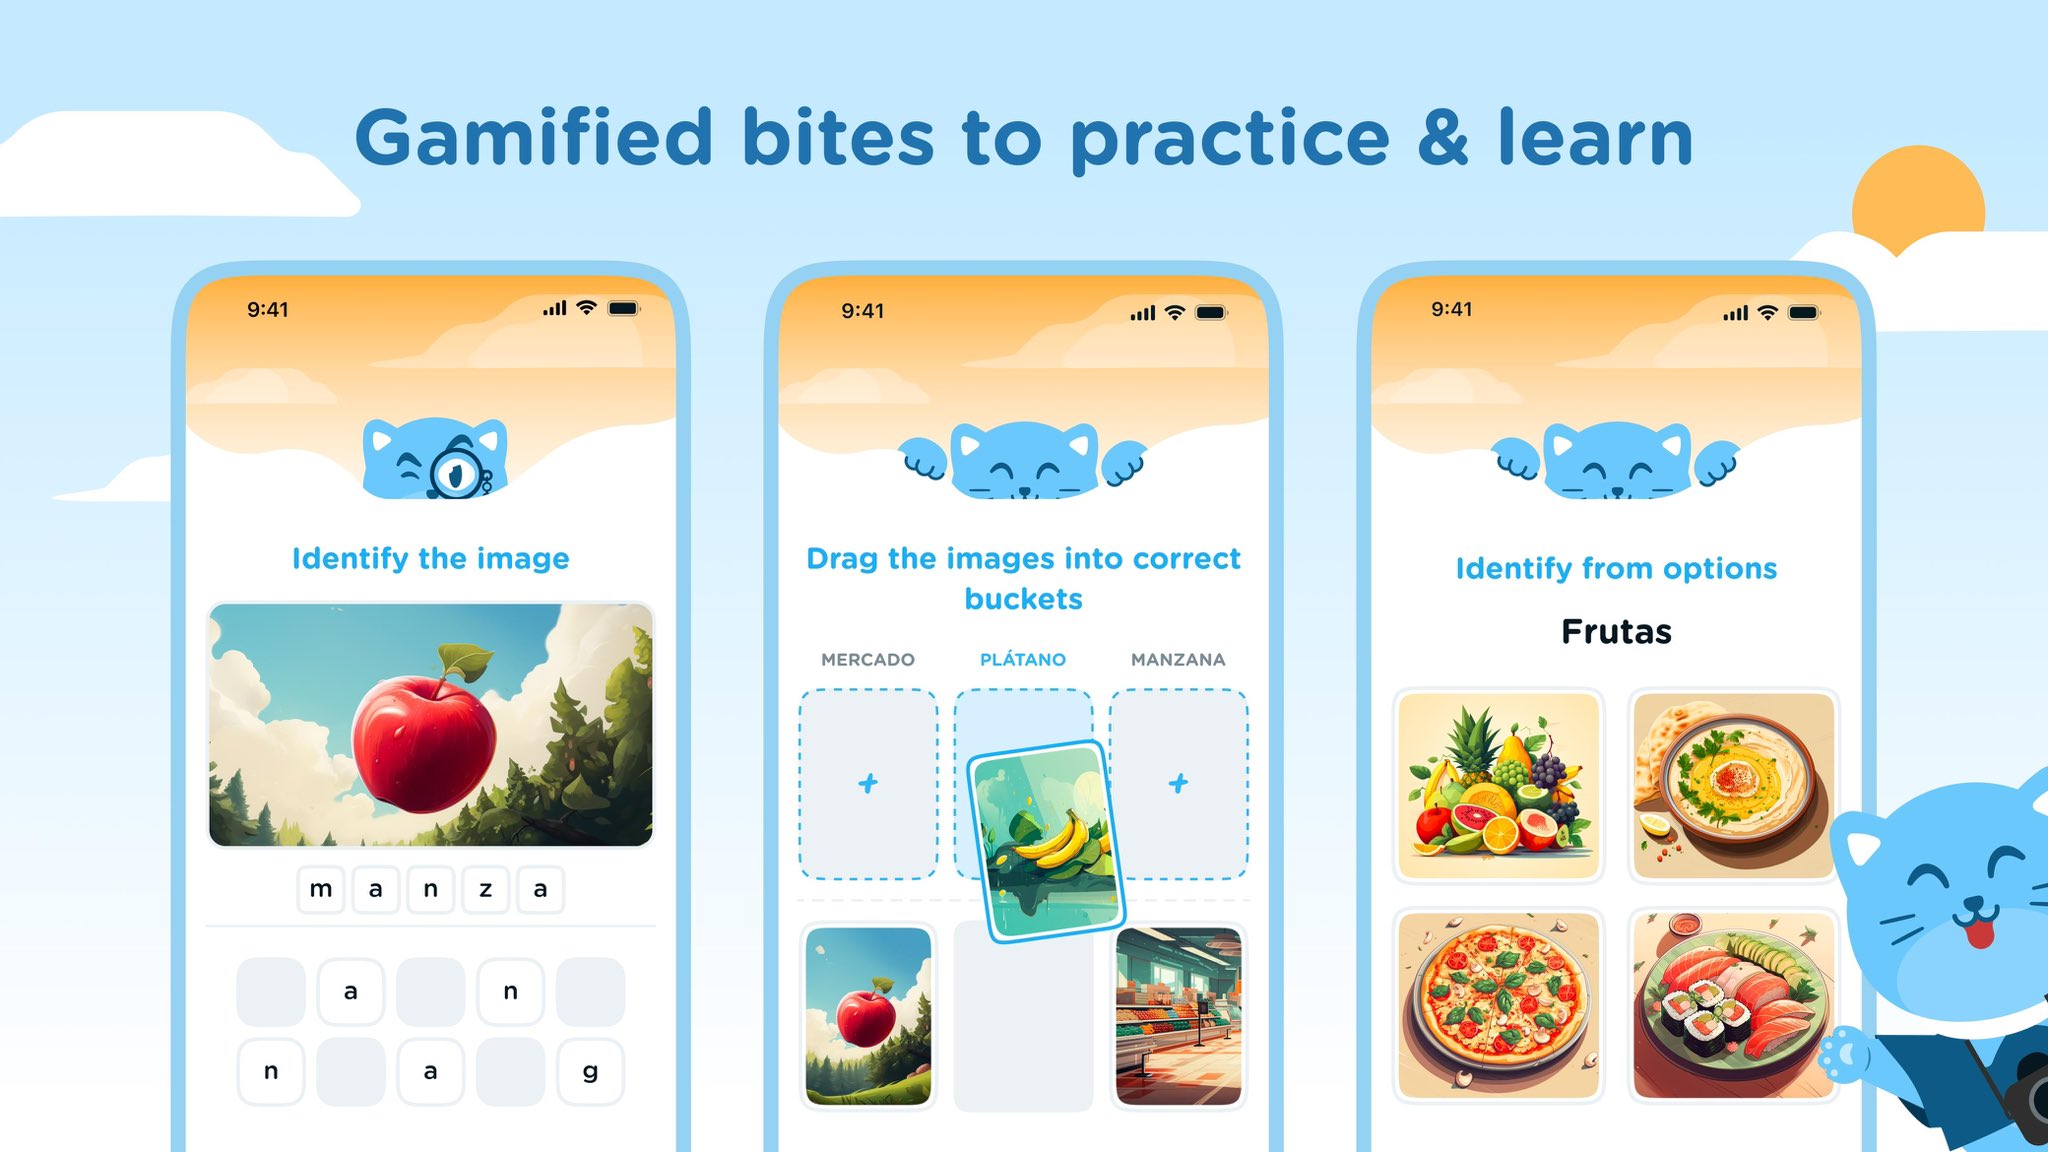 The post accompanied snippets of the upcoming app, which read that the app will offer “gamified bites to practice and learn” as well as “short and interactive storytelling”.